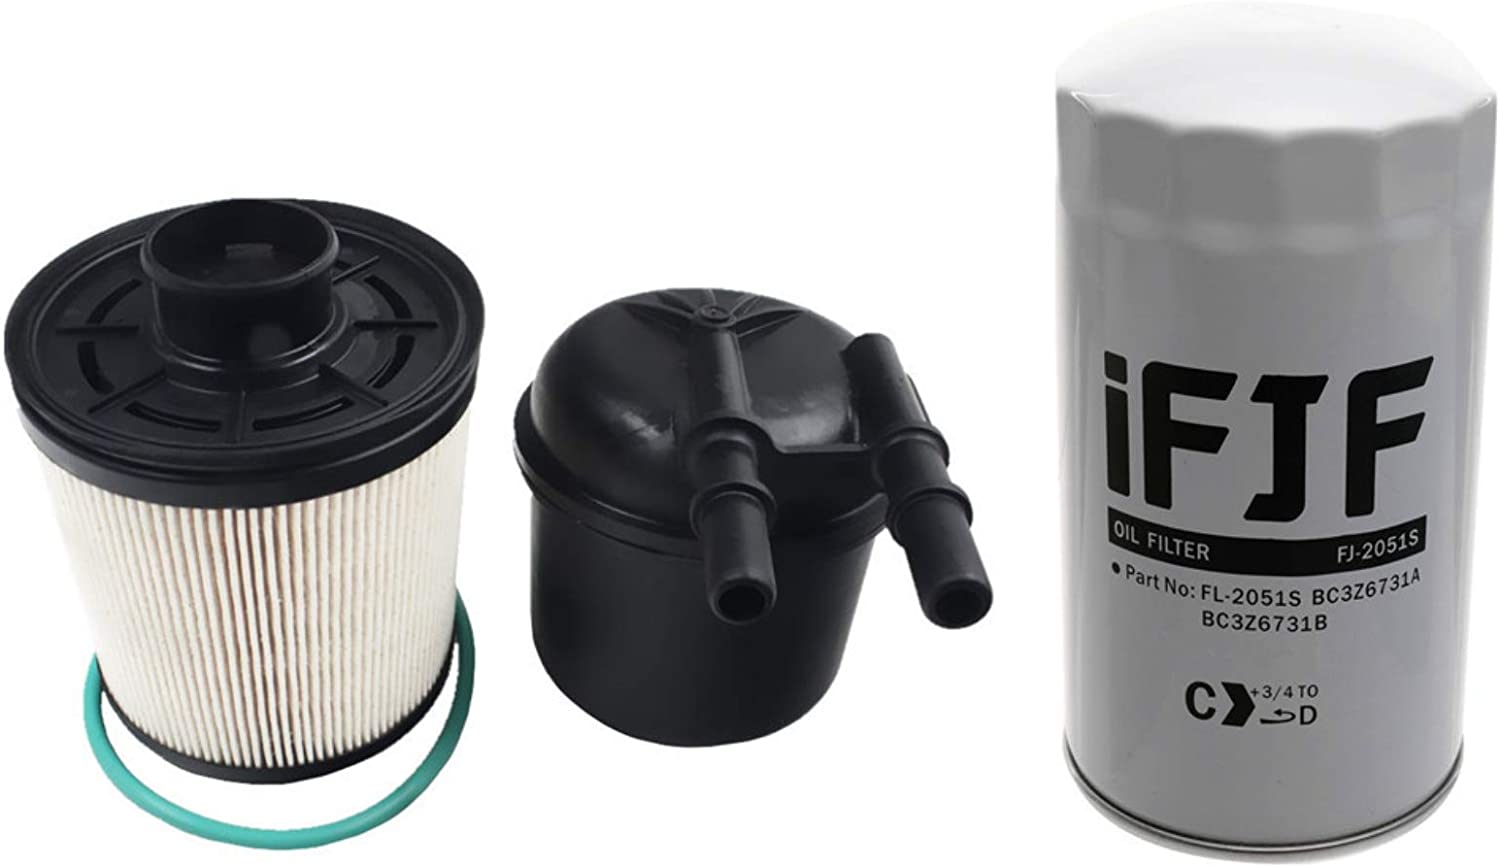 iFJF FD4615 Fuel Filter and FL2051S Oil Filter Replacement for 2011 2016 F250 F350 F450 F550 Super Duty 6.7L Powerstroke V8 Diesel Engine Replaces BC3Z 9N184 B BC3Z 6731 B